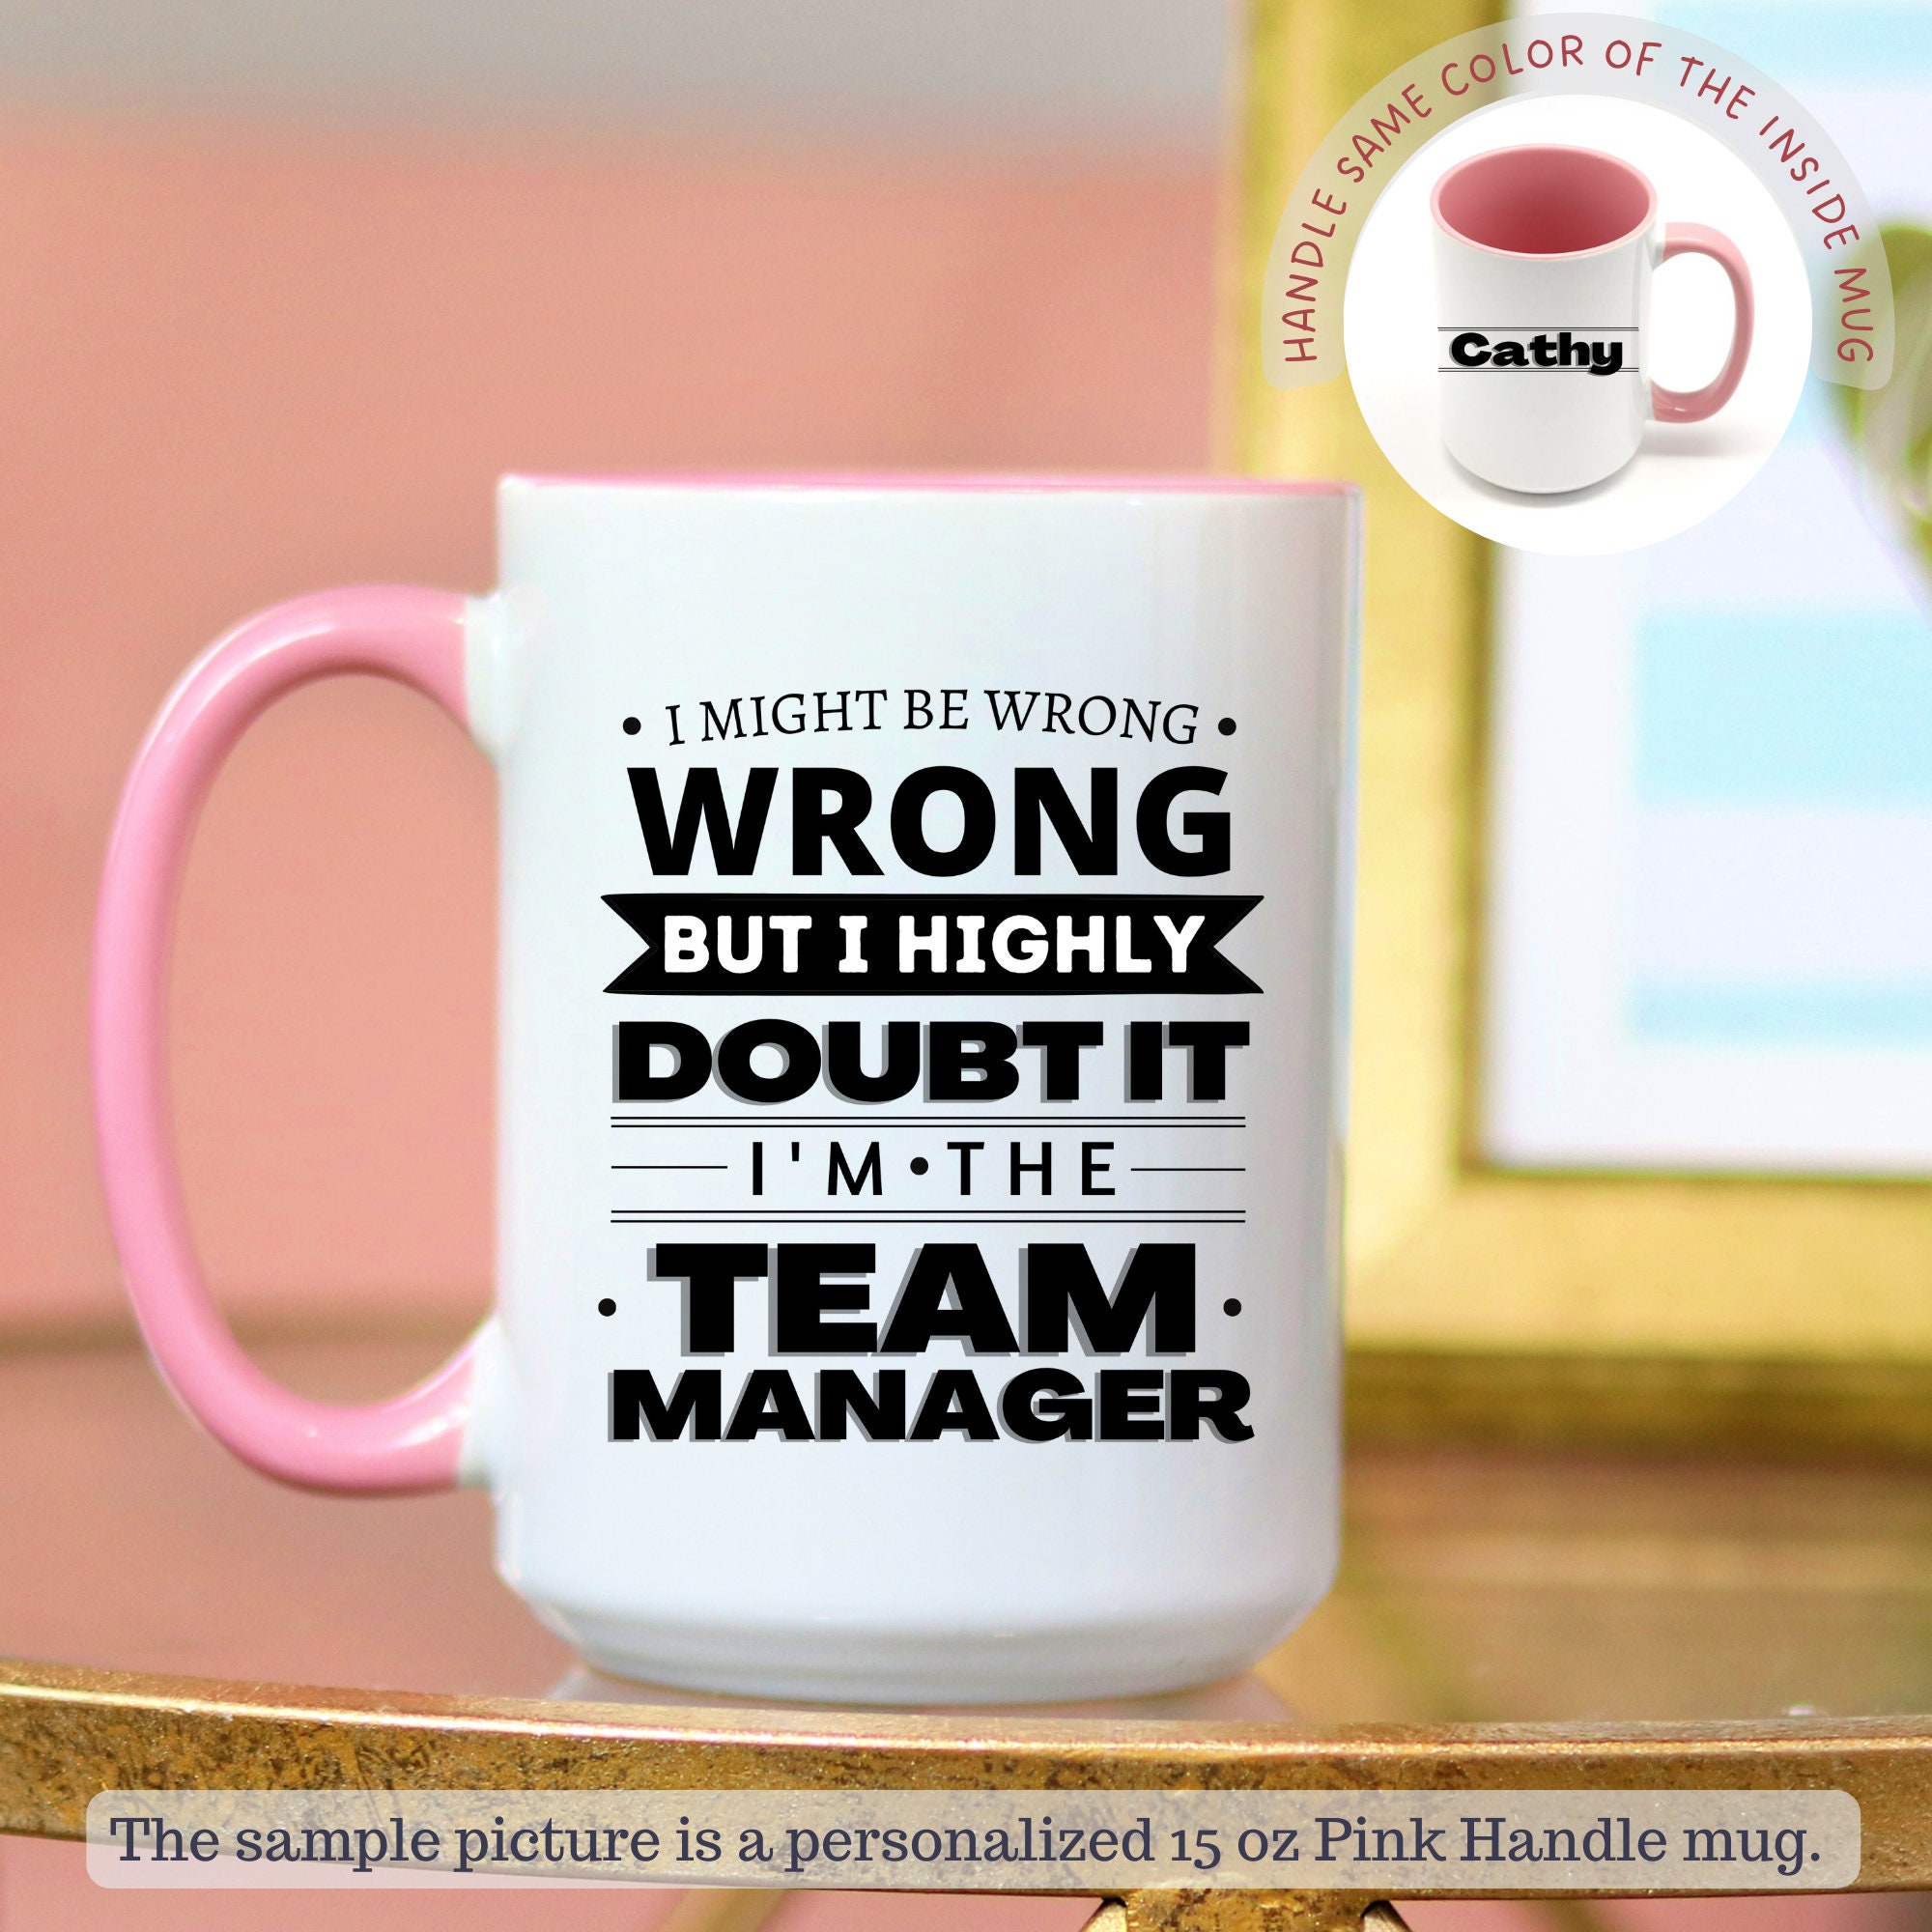 Awesome' Team Manager personalised thank you mug: any ball sport/colours